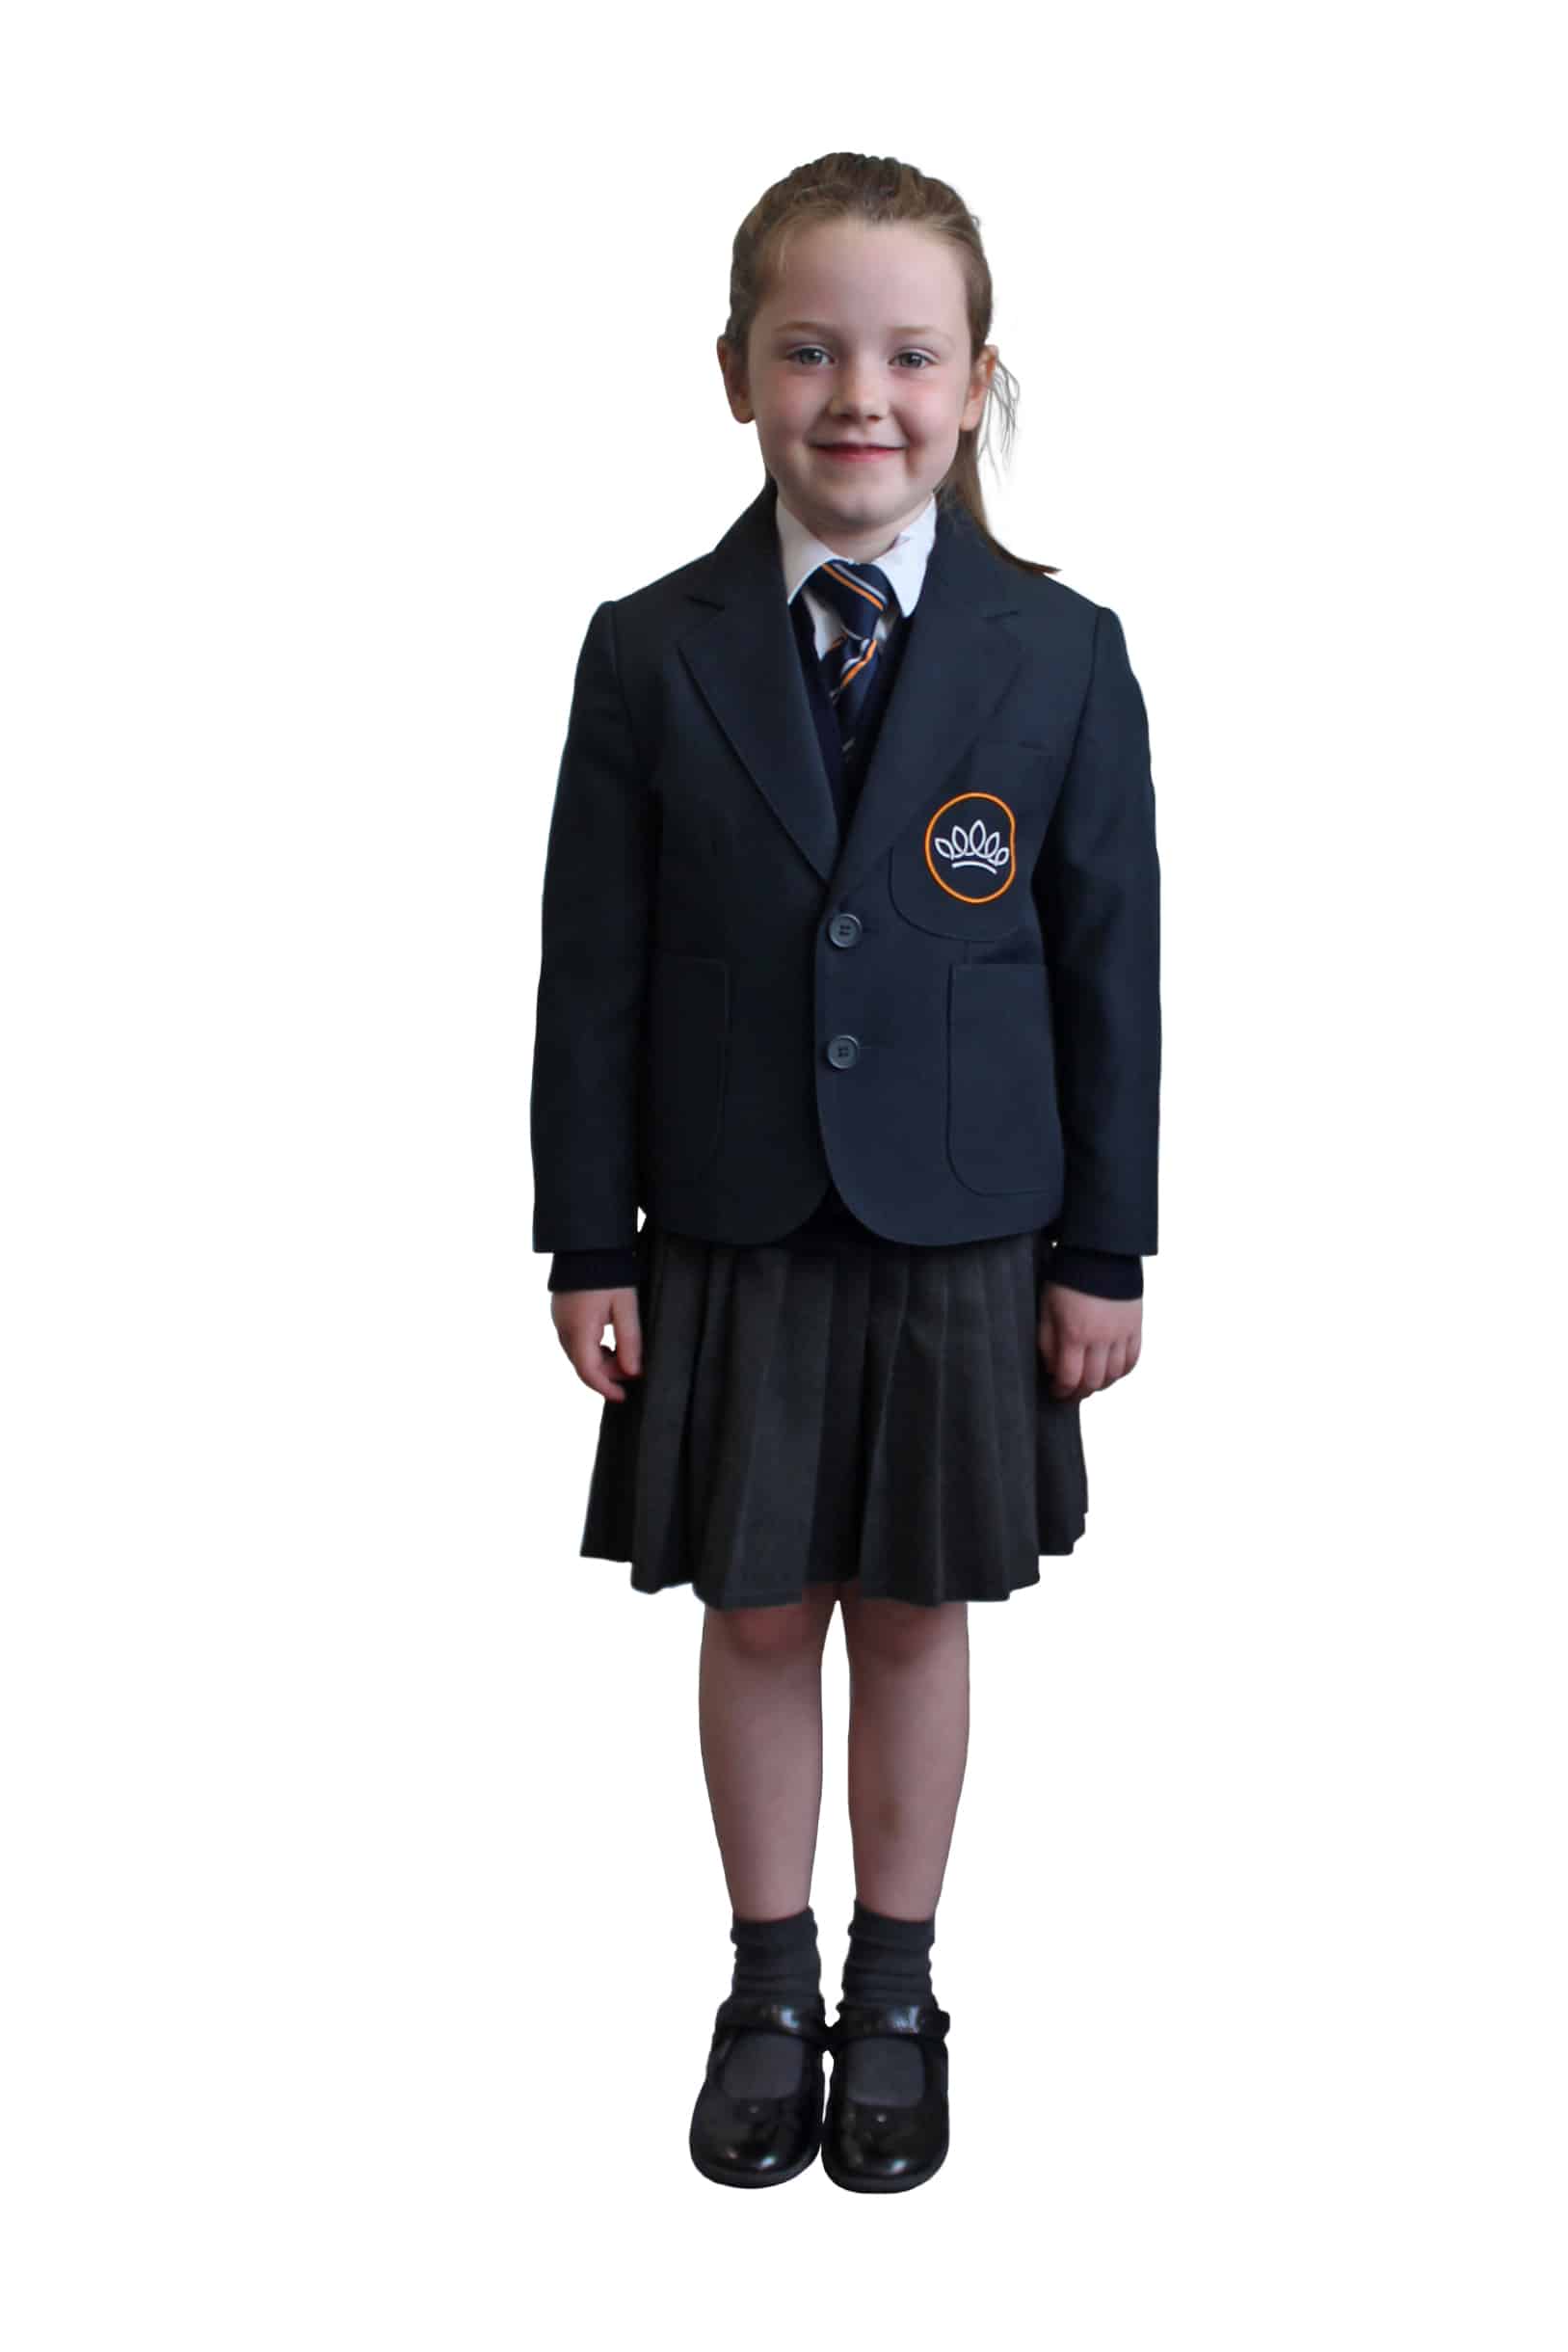 Image of female pupil at Crown Street Primary school wearing full uniform.